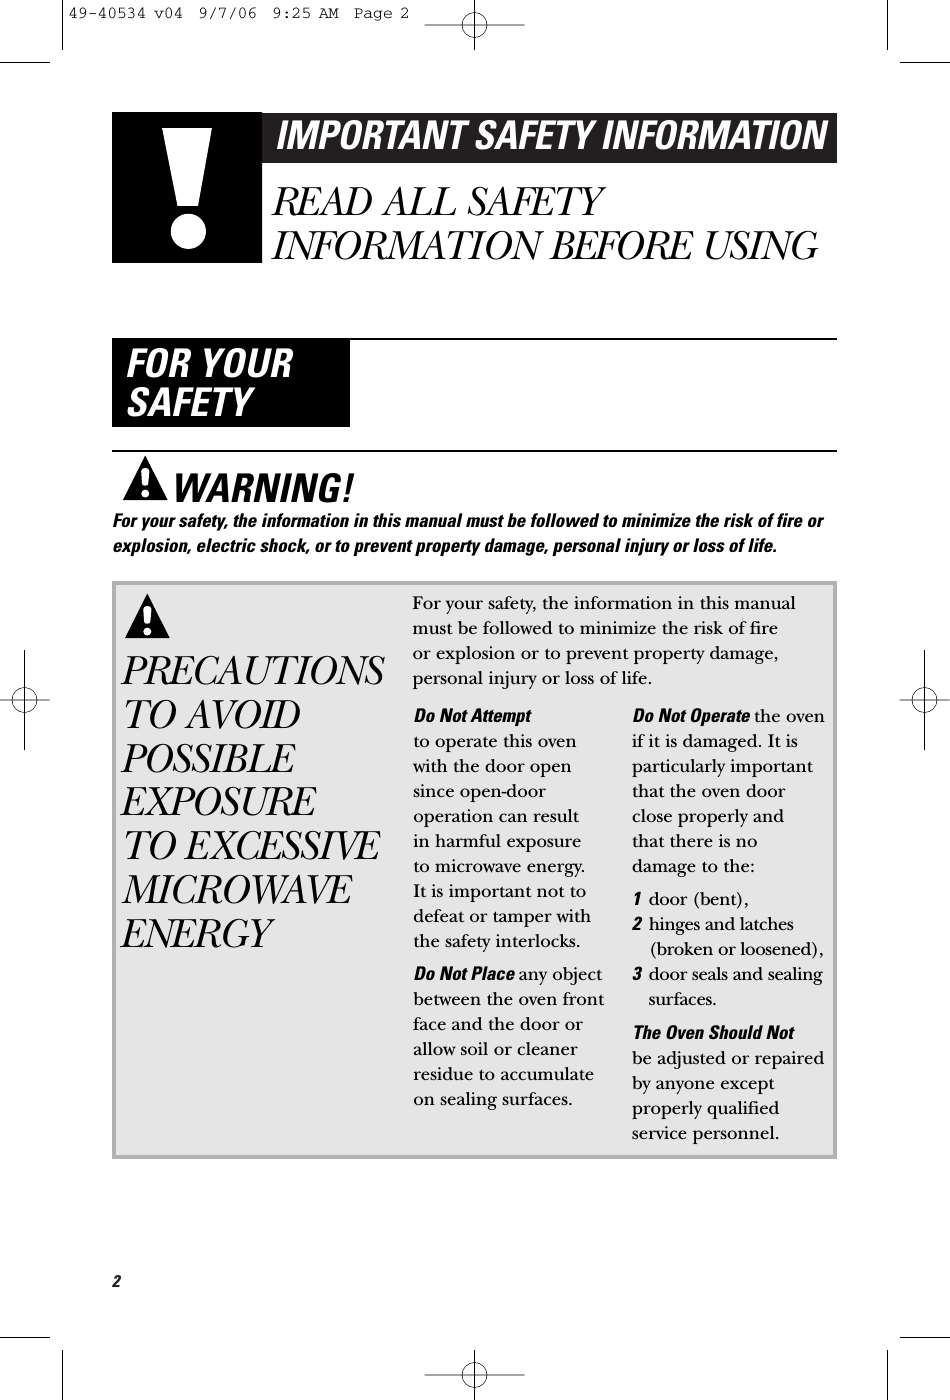 2IMPORTANT SAFETY INFORMATIONREAD ALL SAFETYINFORMATION BEFORE USINGFOR YOURSAFETYPRECAUTIONSTO AVOIDPOSSIBLEEXPOSURE TO EXCESSIVEMICROWAVEENERGYFor your safety, the information in this manualmust be followed to minimize the risk of fire or explosion or to prevent property damage,personal injury or loss of life.Do Not Attempt to operate this ovenwith the door opensince open-dooroperation can result in harmful exposure to microwave energy. It is important not todefeat or tamper withthe safety interlocks.Do Not Place any objectbetween the oven frontface and the door orallow soil or cleanerresidue to accumulateon sealing surfaces.Do Not Operate the oven if it is damaged. It isparticularly importantthat the oven doorclose properly and that there is nodamage to the:1door (bent),2hinges and latches(broken or loosened),3door seals and sealingsurfaces.The Oven Should Not be adjusted or repairedby anyone exceptproperly qualifiedservice personnel.WARNING!For your safety, the information in this manual must be followed to minimize the risk of fire orexplosion, electric shock, or to prevent property damage, personal injury or loss of life.49-40534 v04  9/7/06  9:25 AM  Page 2